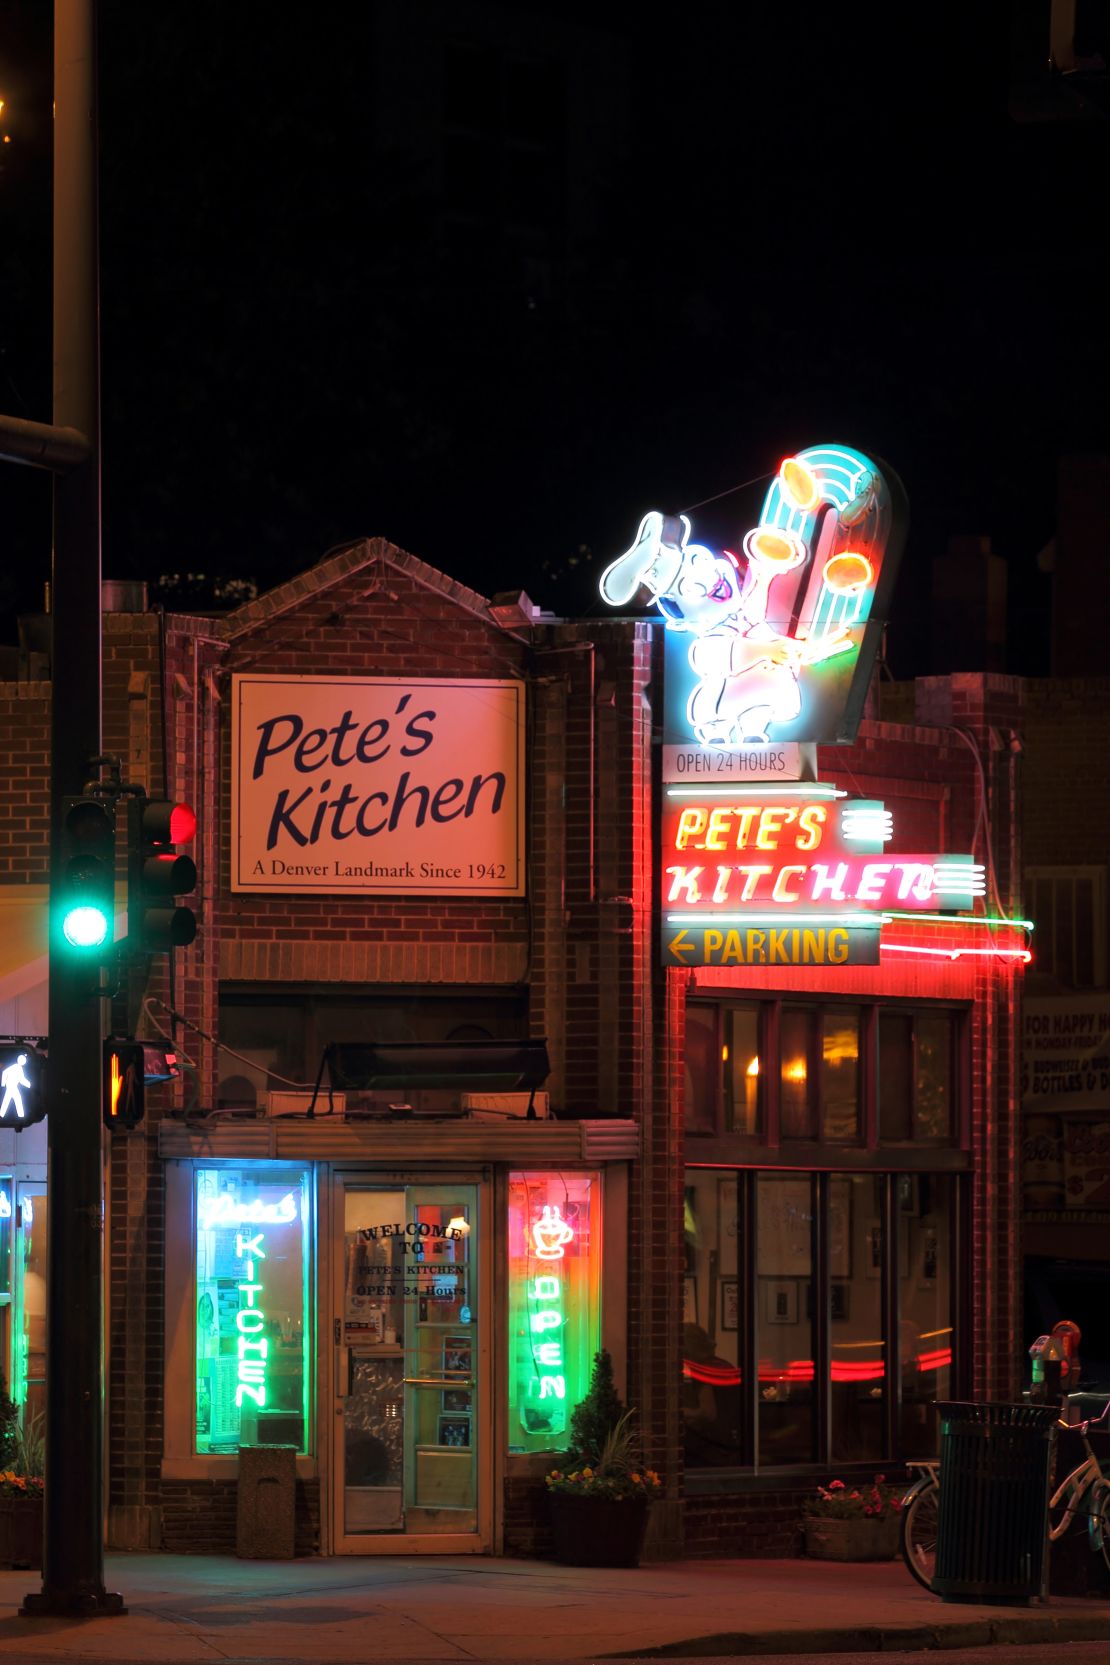 Pete's Kitchen in Denver, a staple of the city, has reopened 24-hours, but only on weekends.